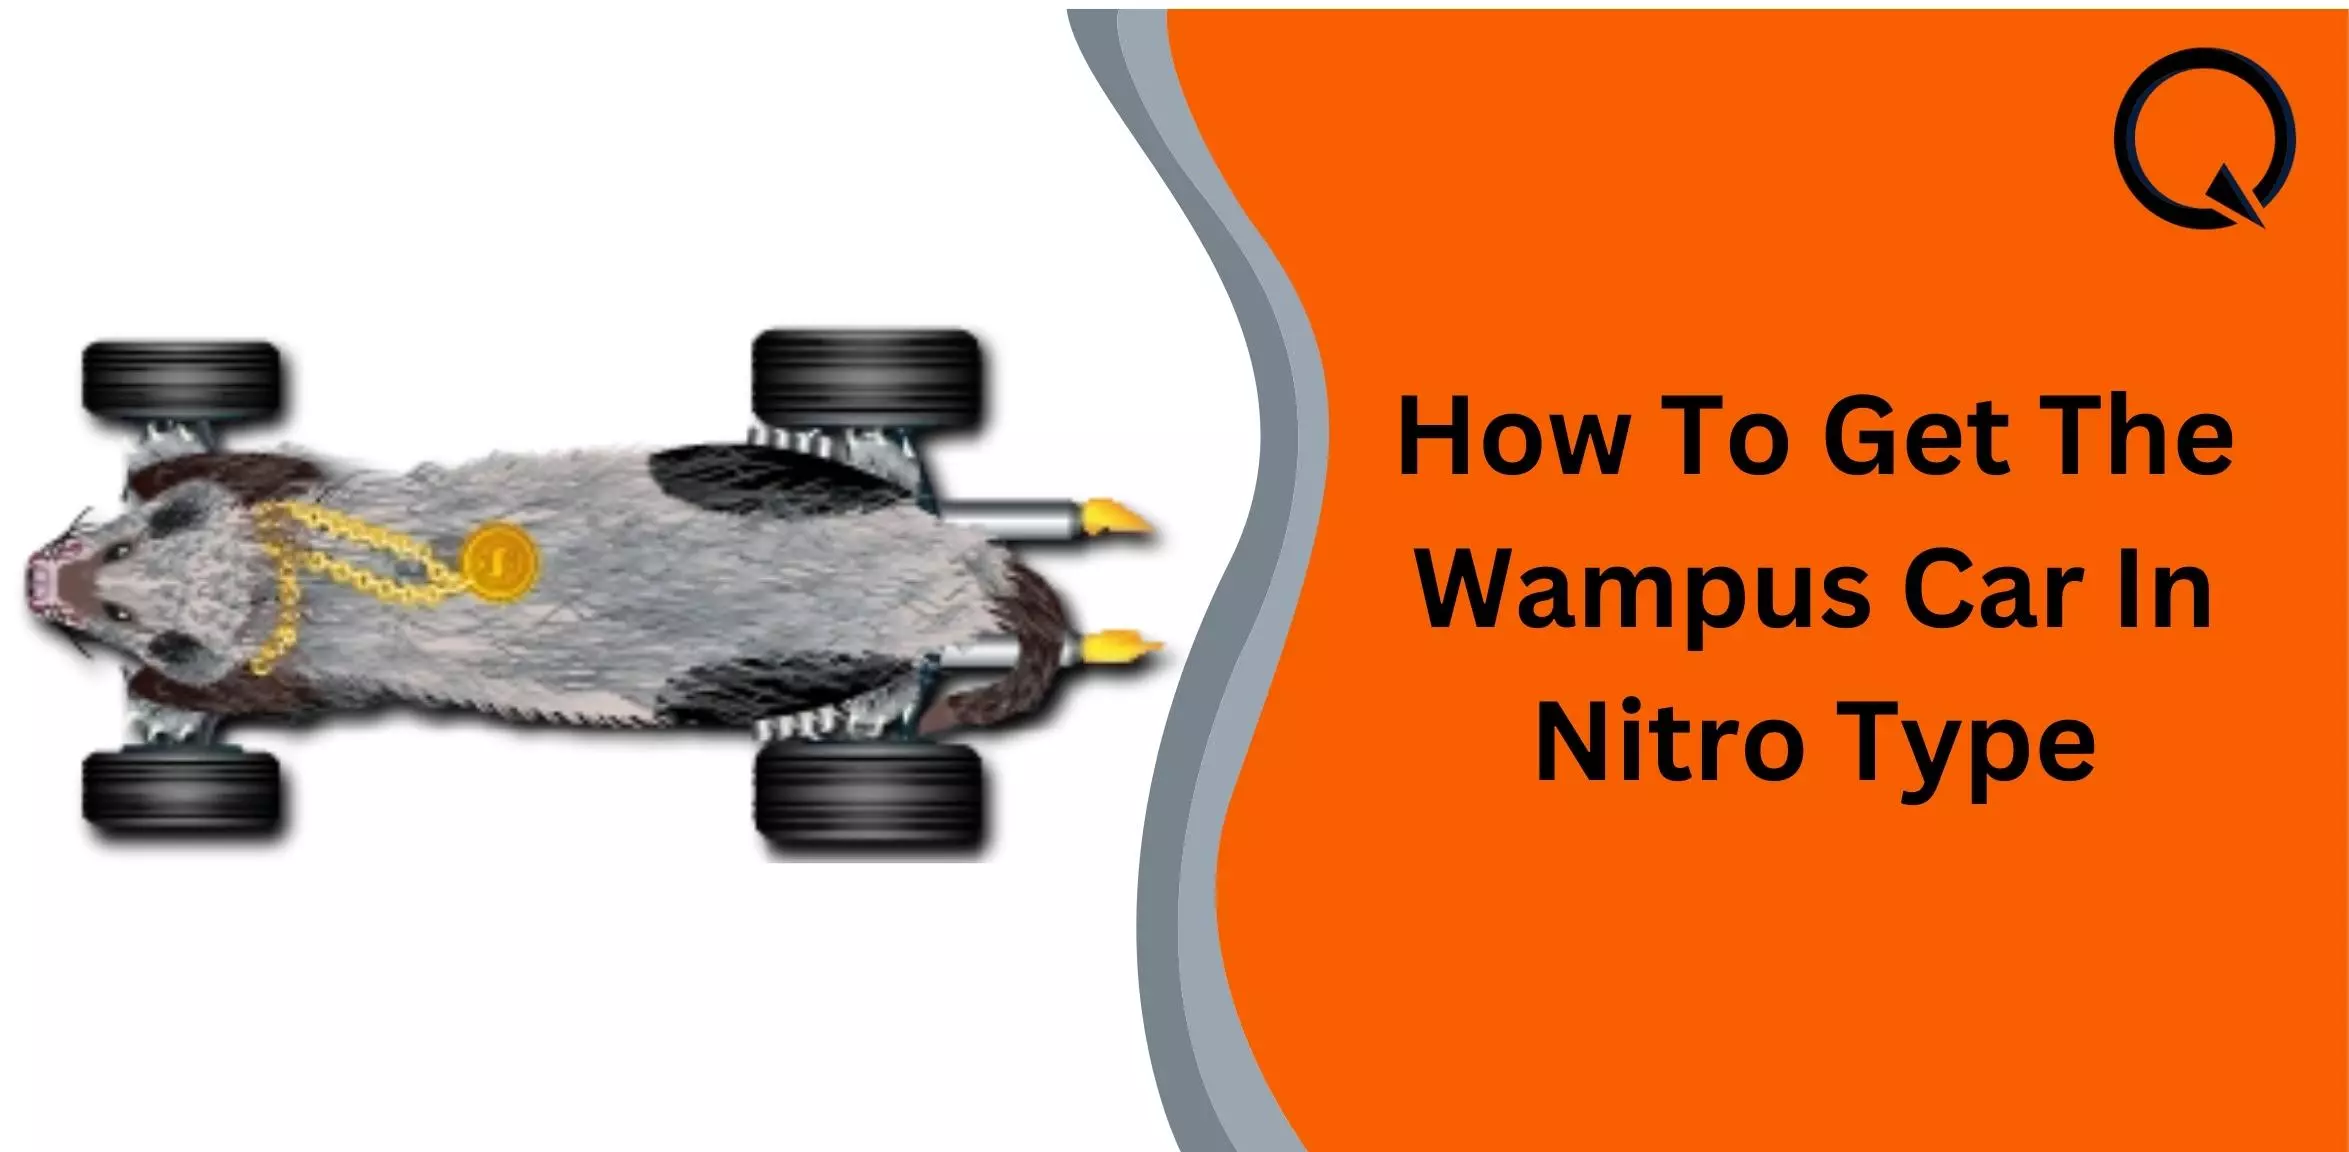 How To Get The Wampus Car In Nitro Type